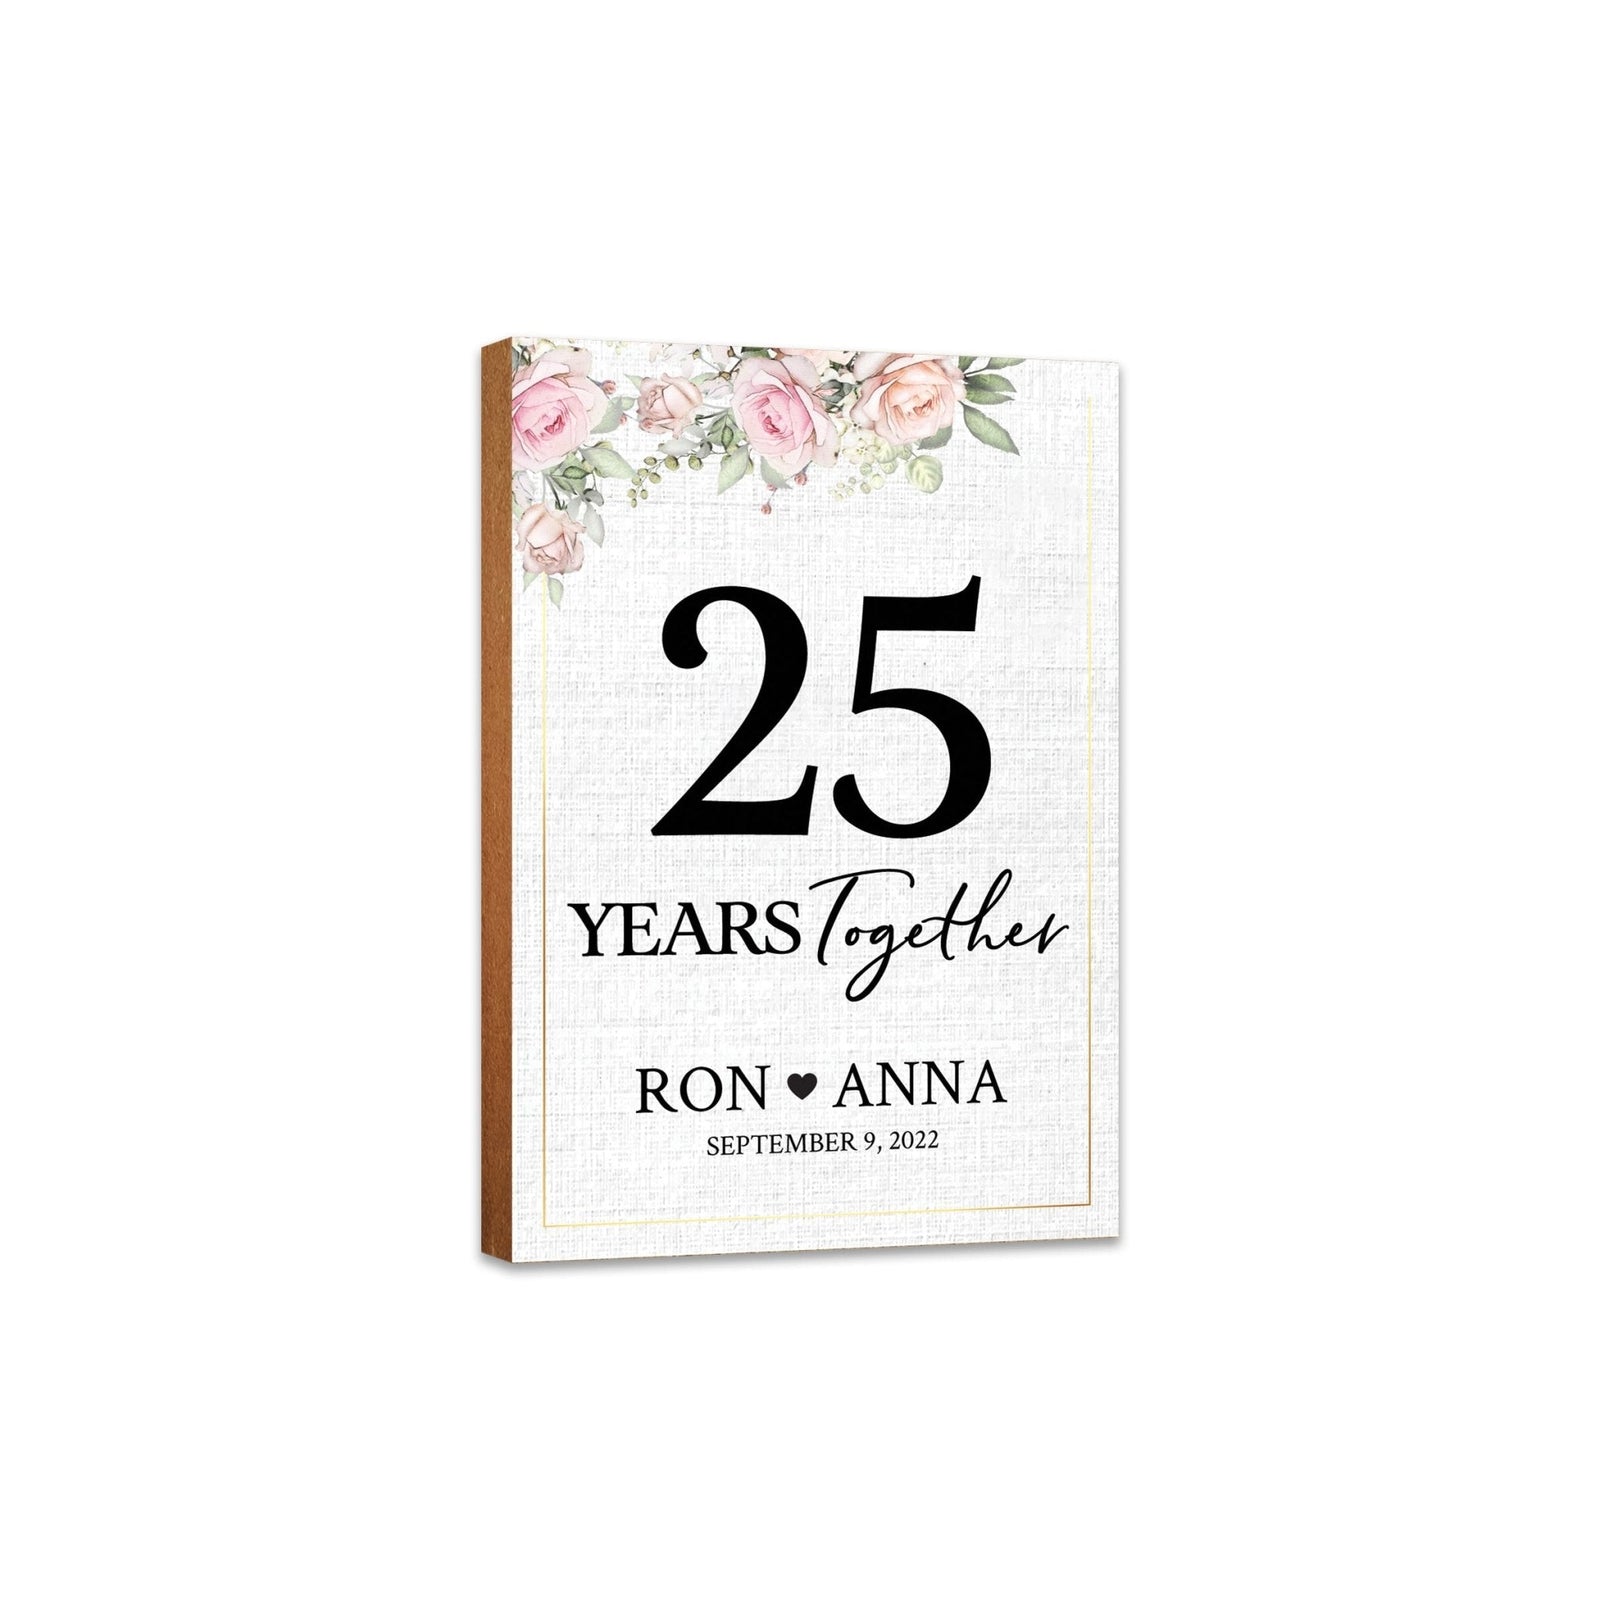 Personalized Unique Shelf Décor and Tabletop Signs Gifts for 25th Wedding Anniversary - LifeSong Milestones